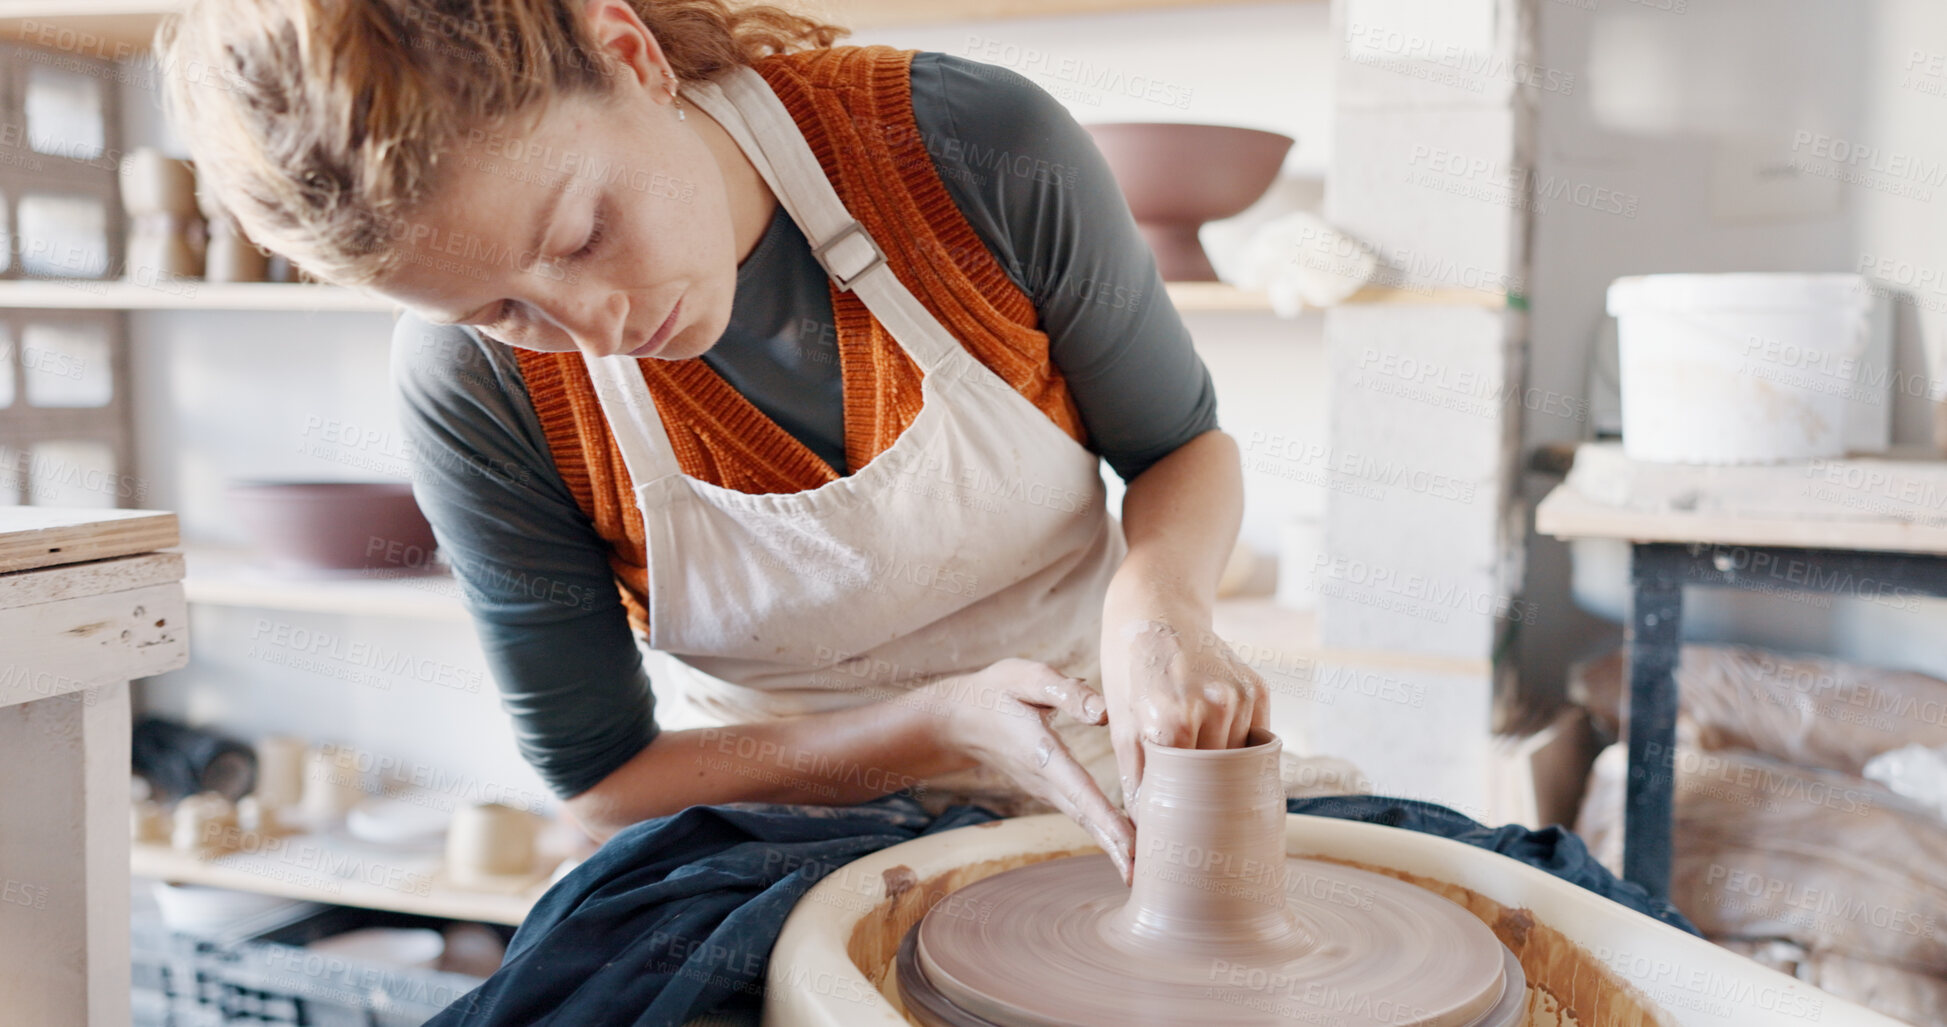 Buy stock photo Pottery wheel, woman and mold sculpture in workshop, creative artist studio and small business of product, craft and manufacturing. Ceramic designer, clay artisan hobby and mud for production process